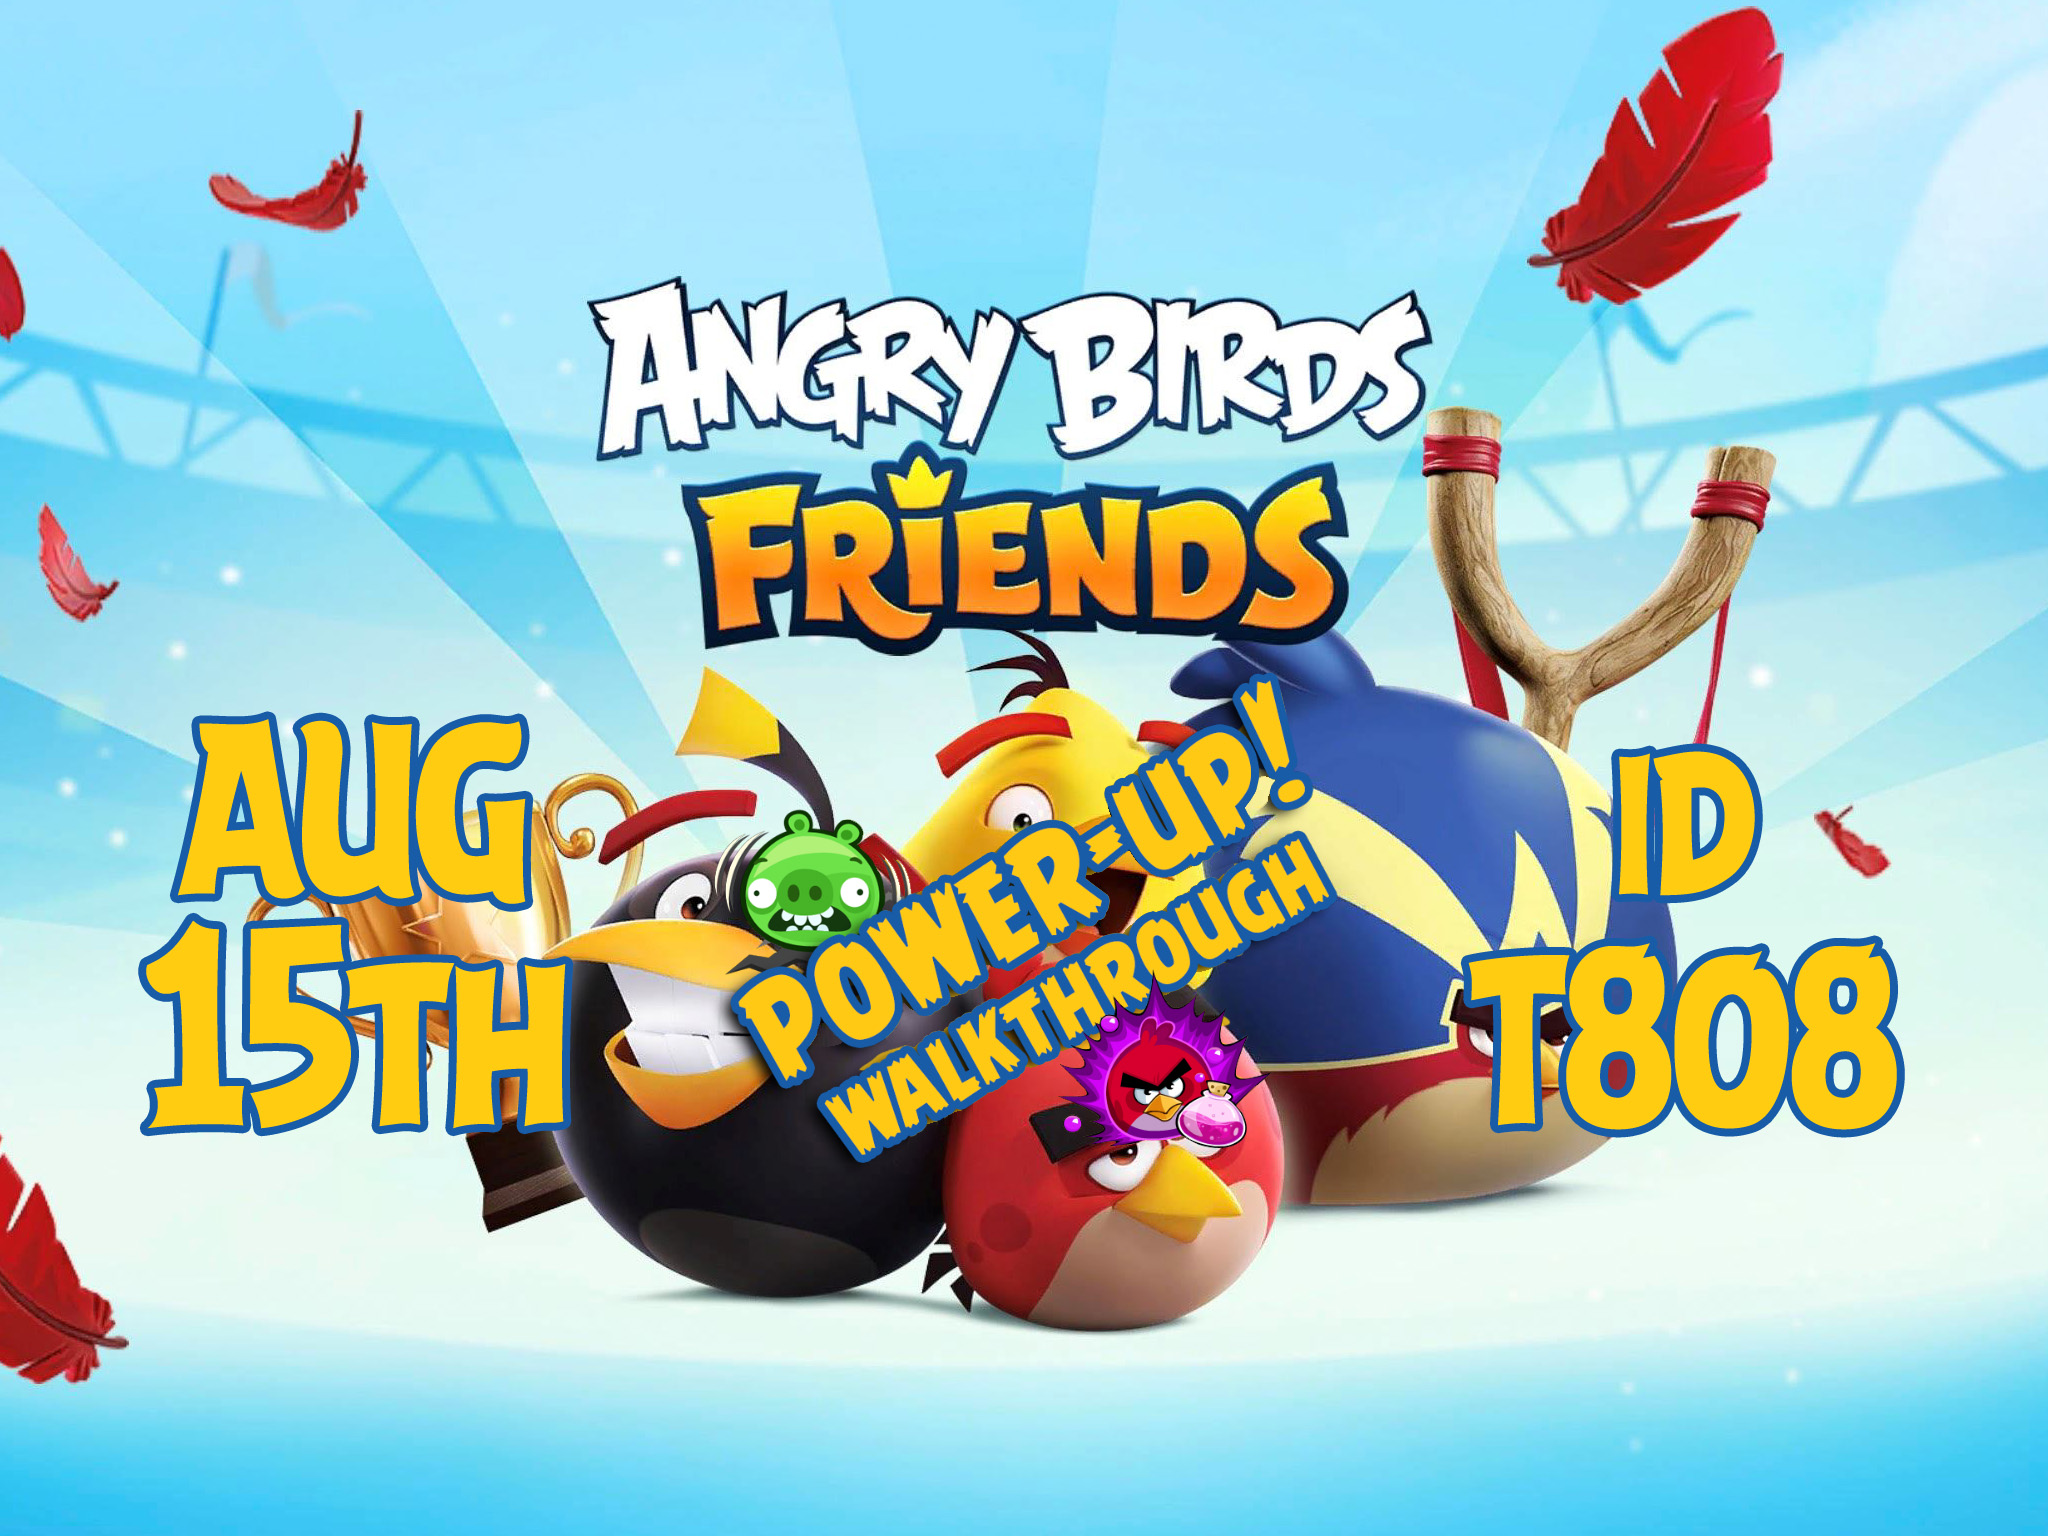 Angry-Birds-Friends-Tournament-T808-Feature-Image-PU